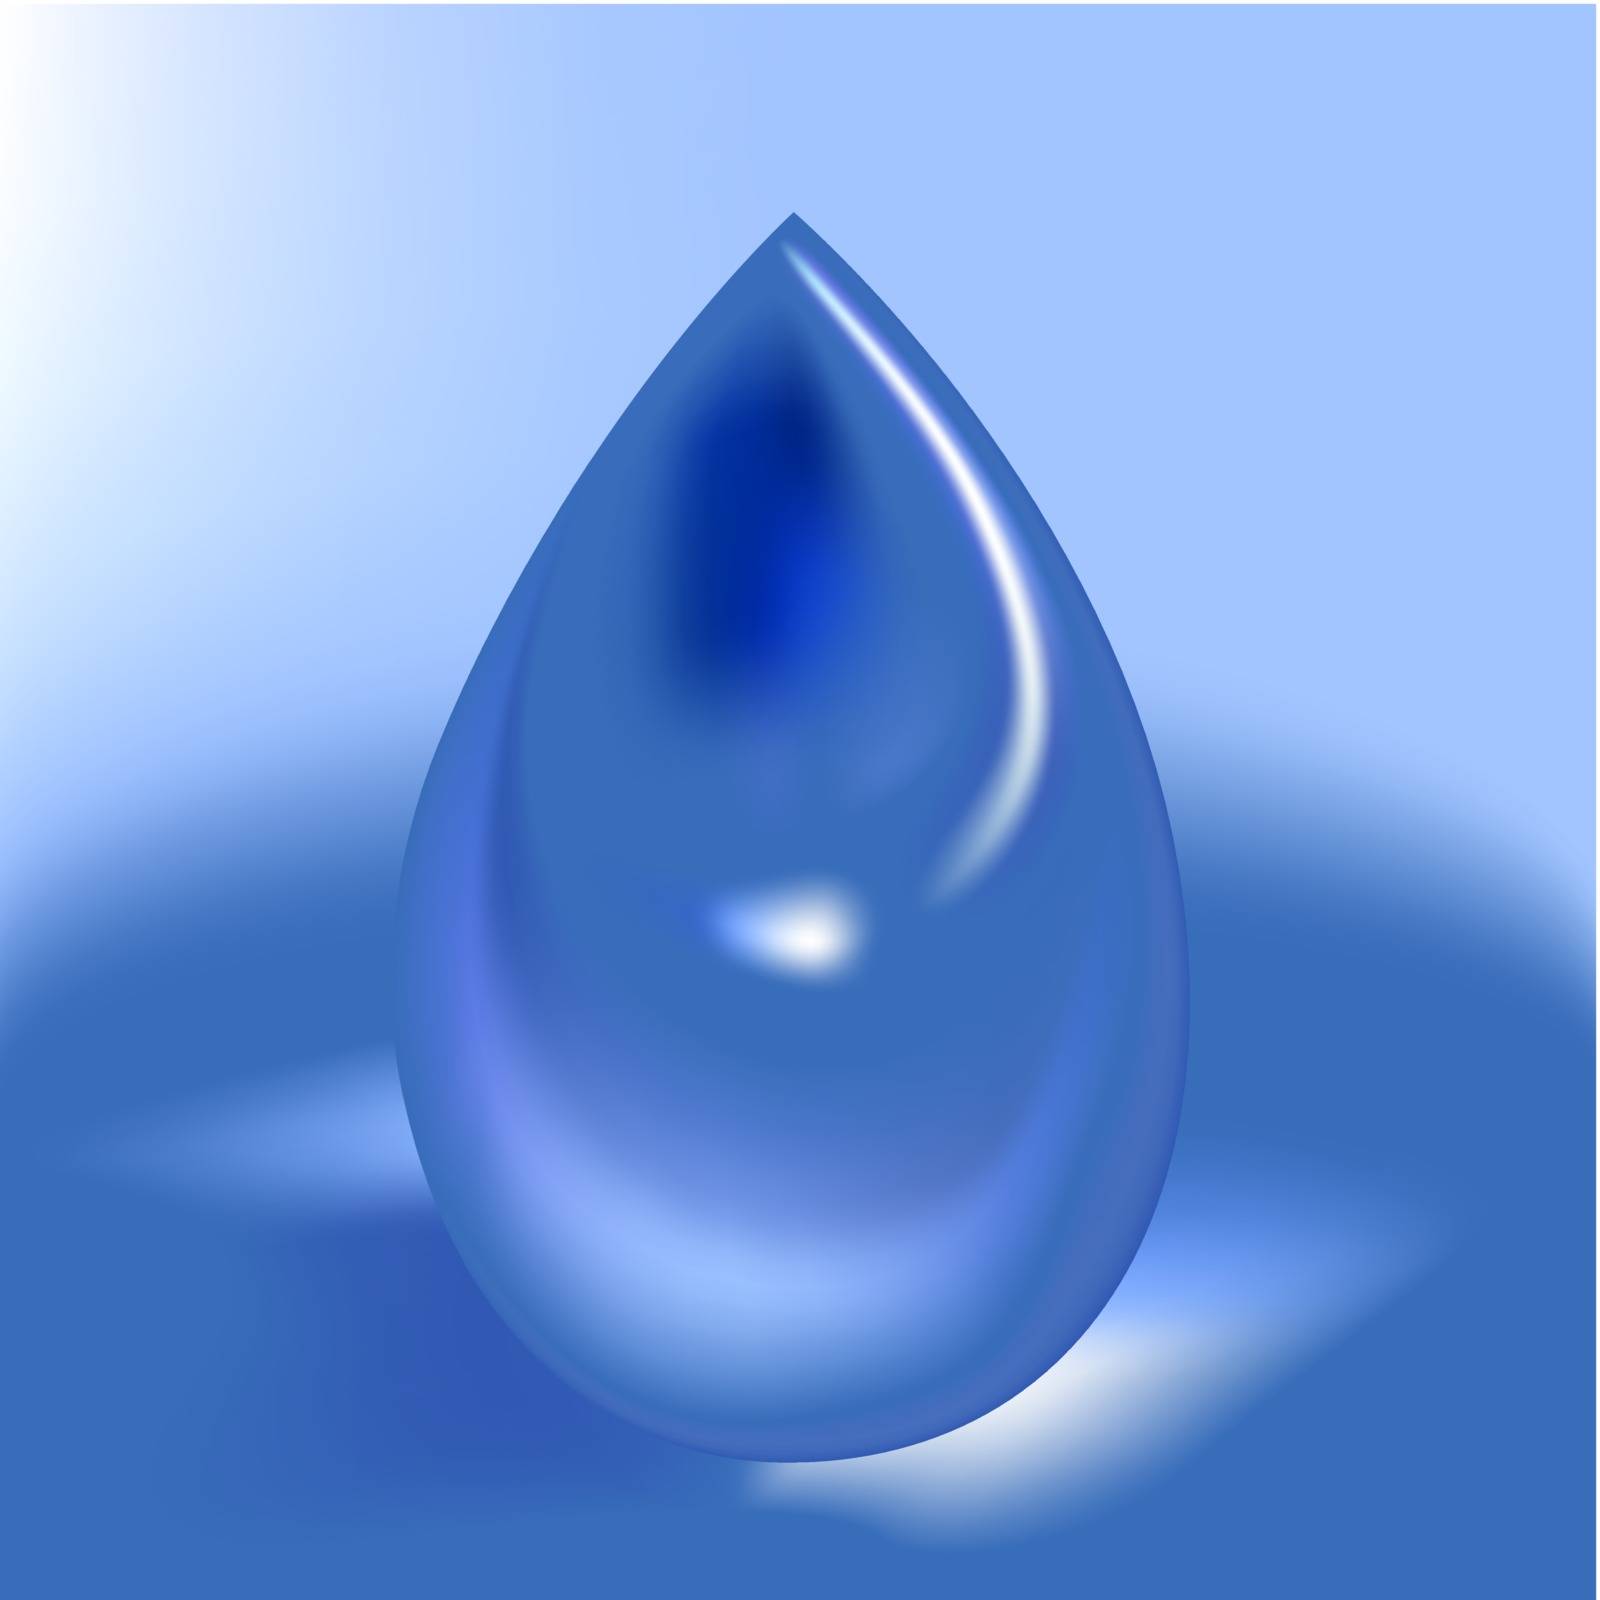 Water Drop - Colored Illustration, Vector